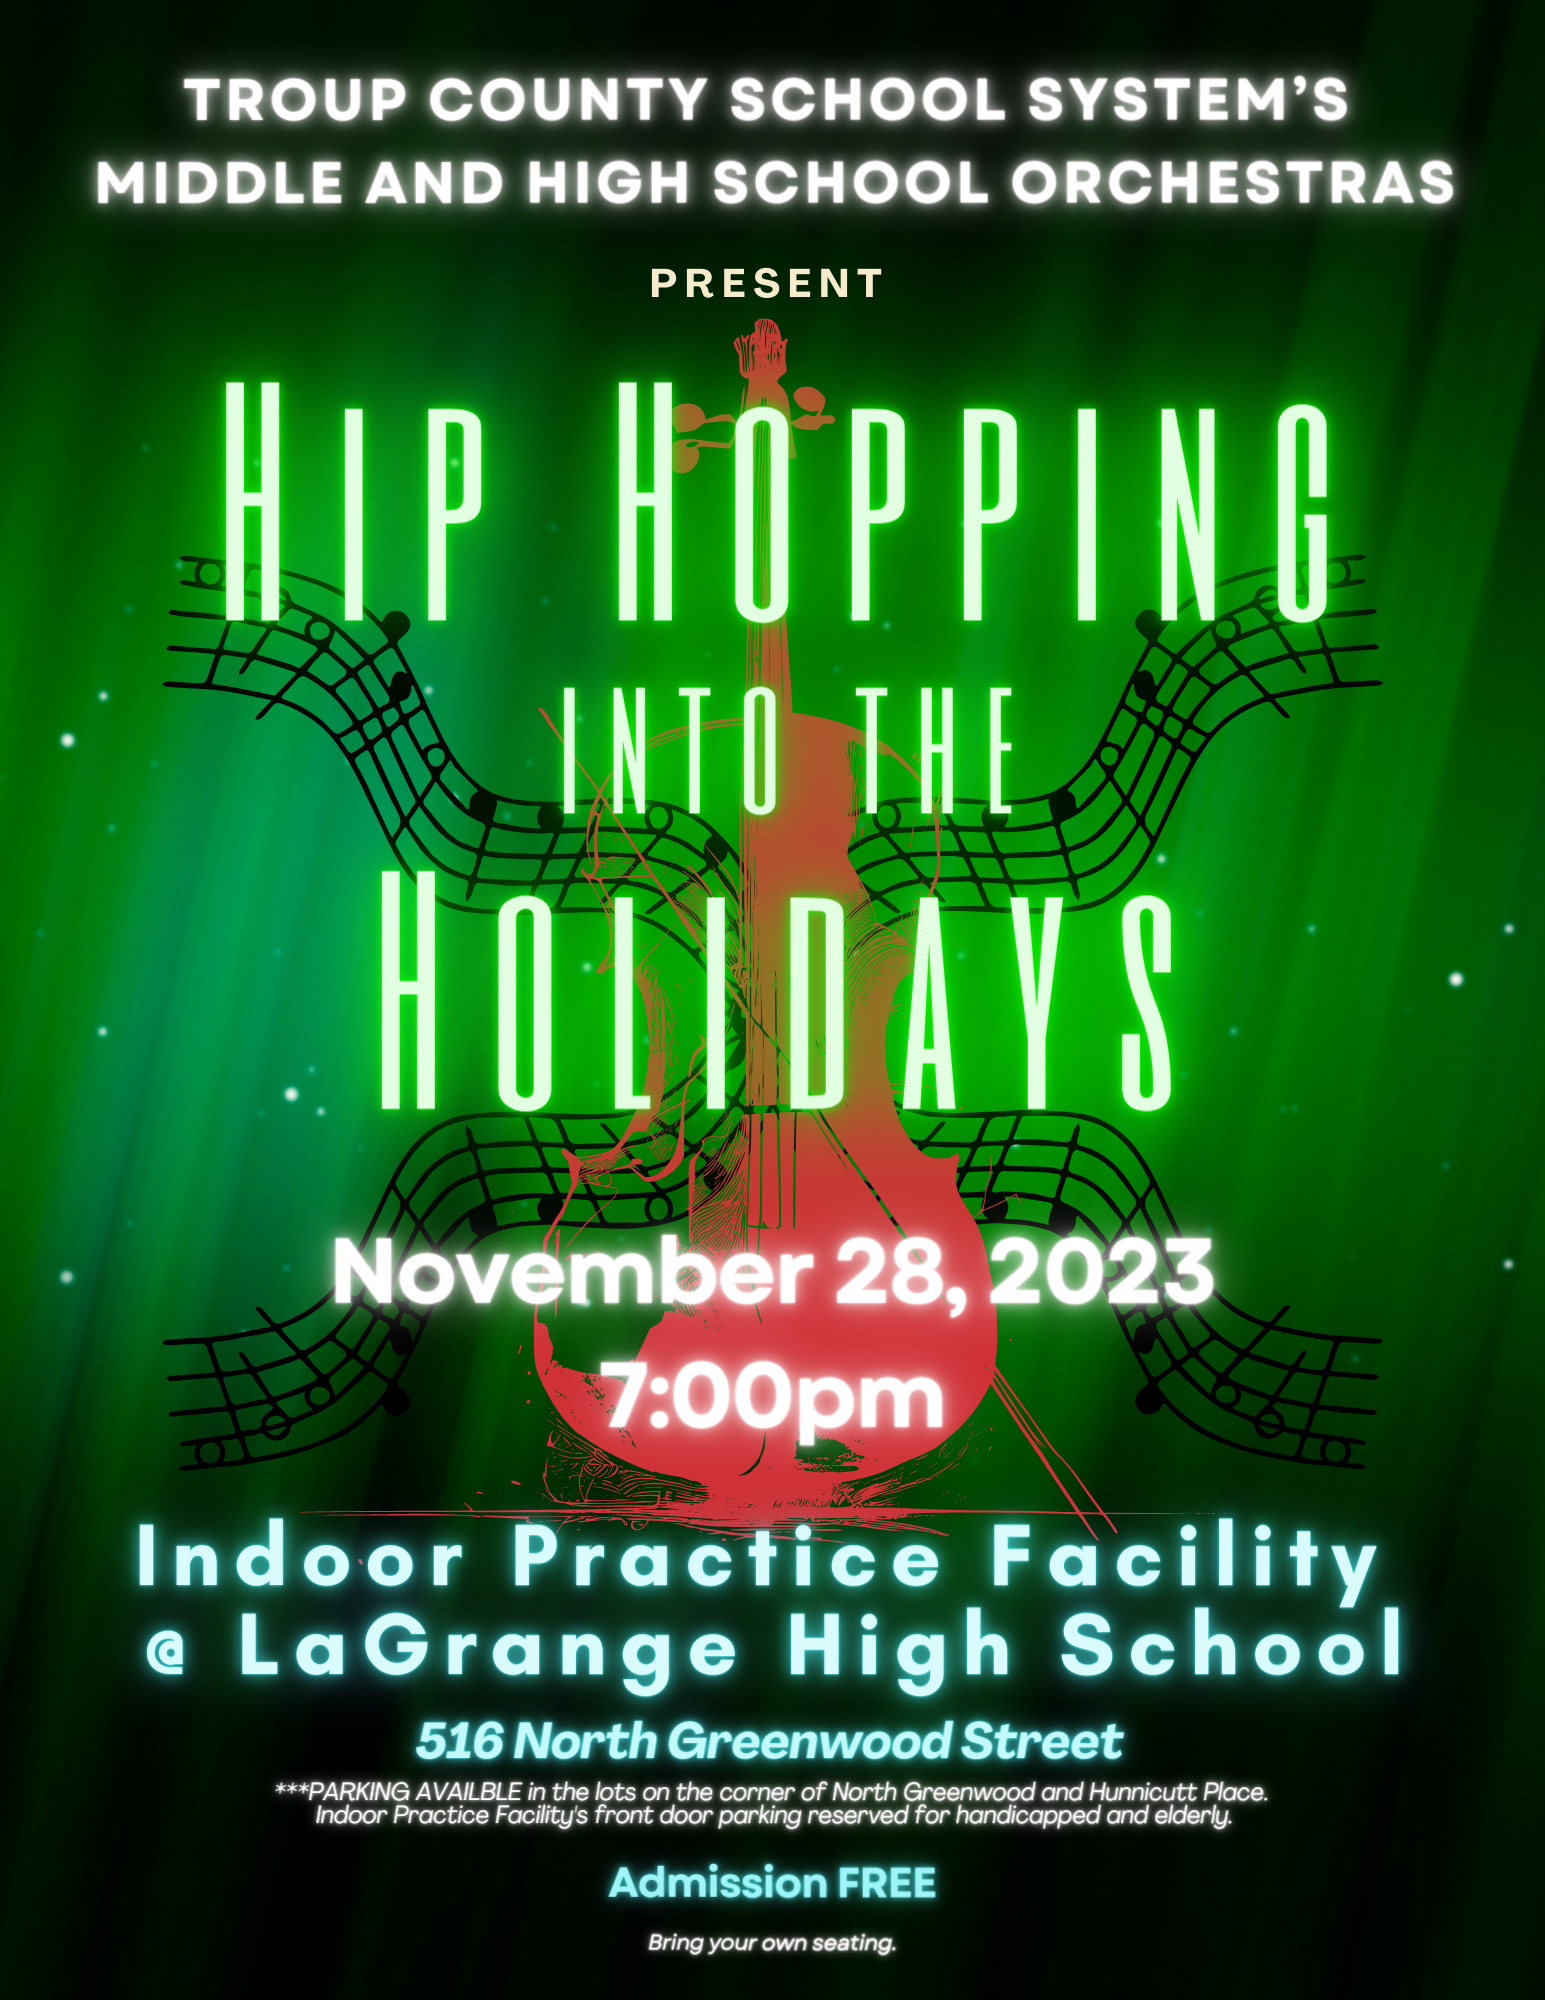 TCSS Hip Hopping into the Holidays